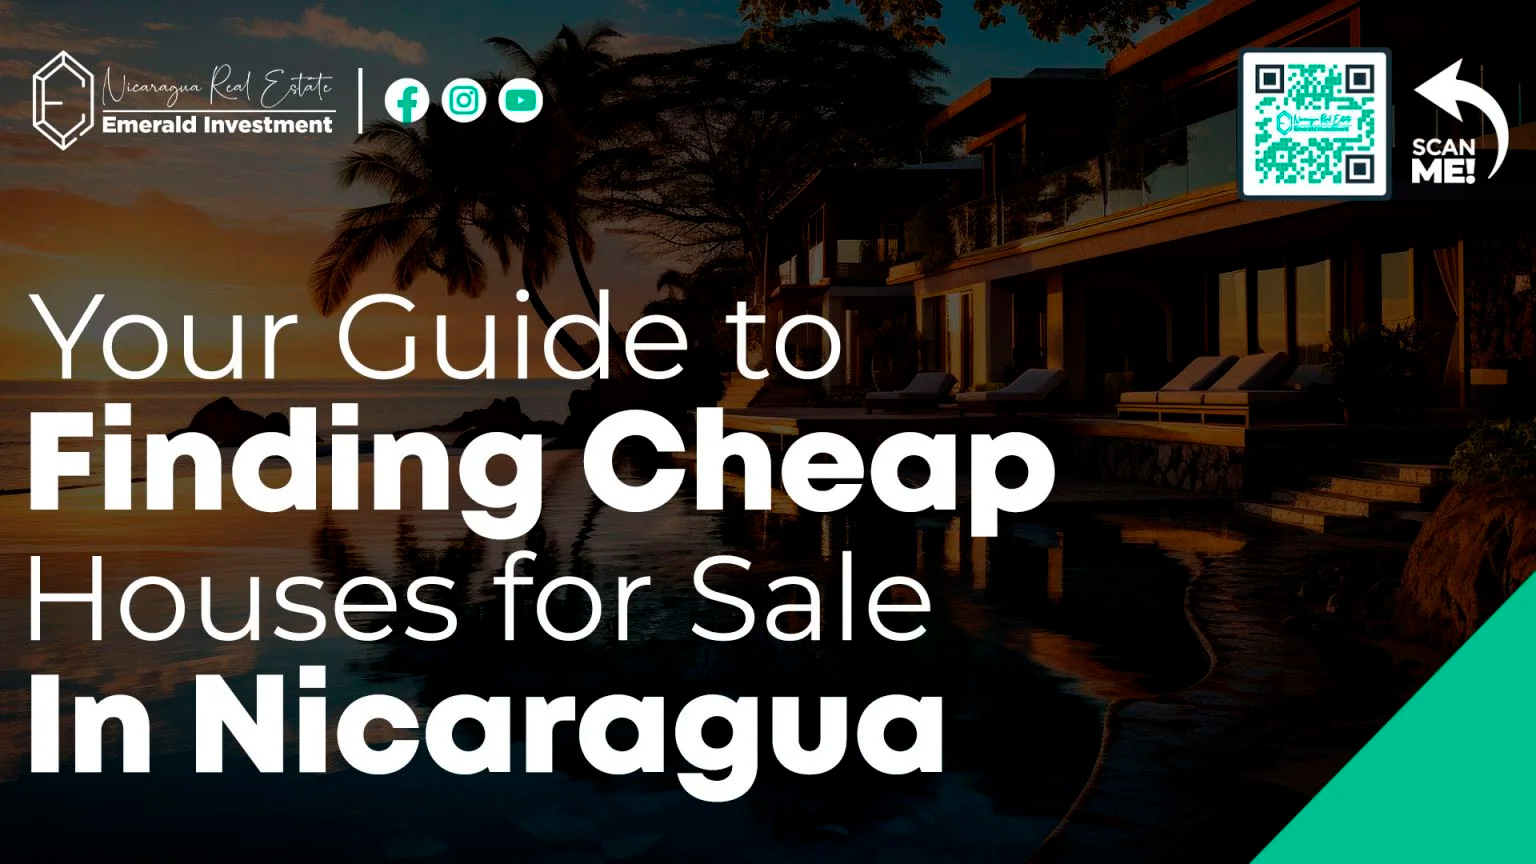 Your Guide to Finding Cheap Houses for Sale in Nicaragua